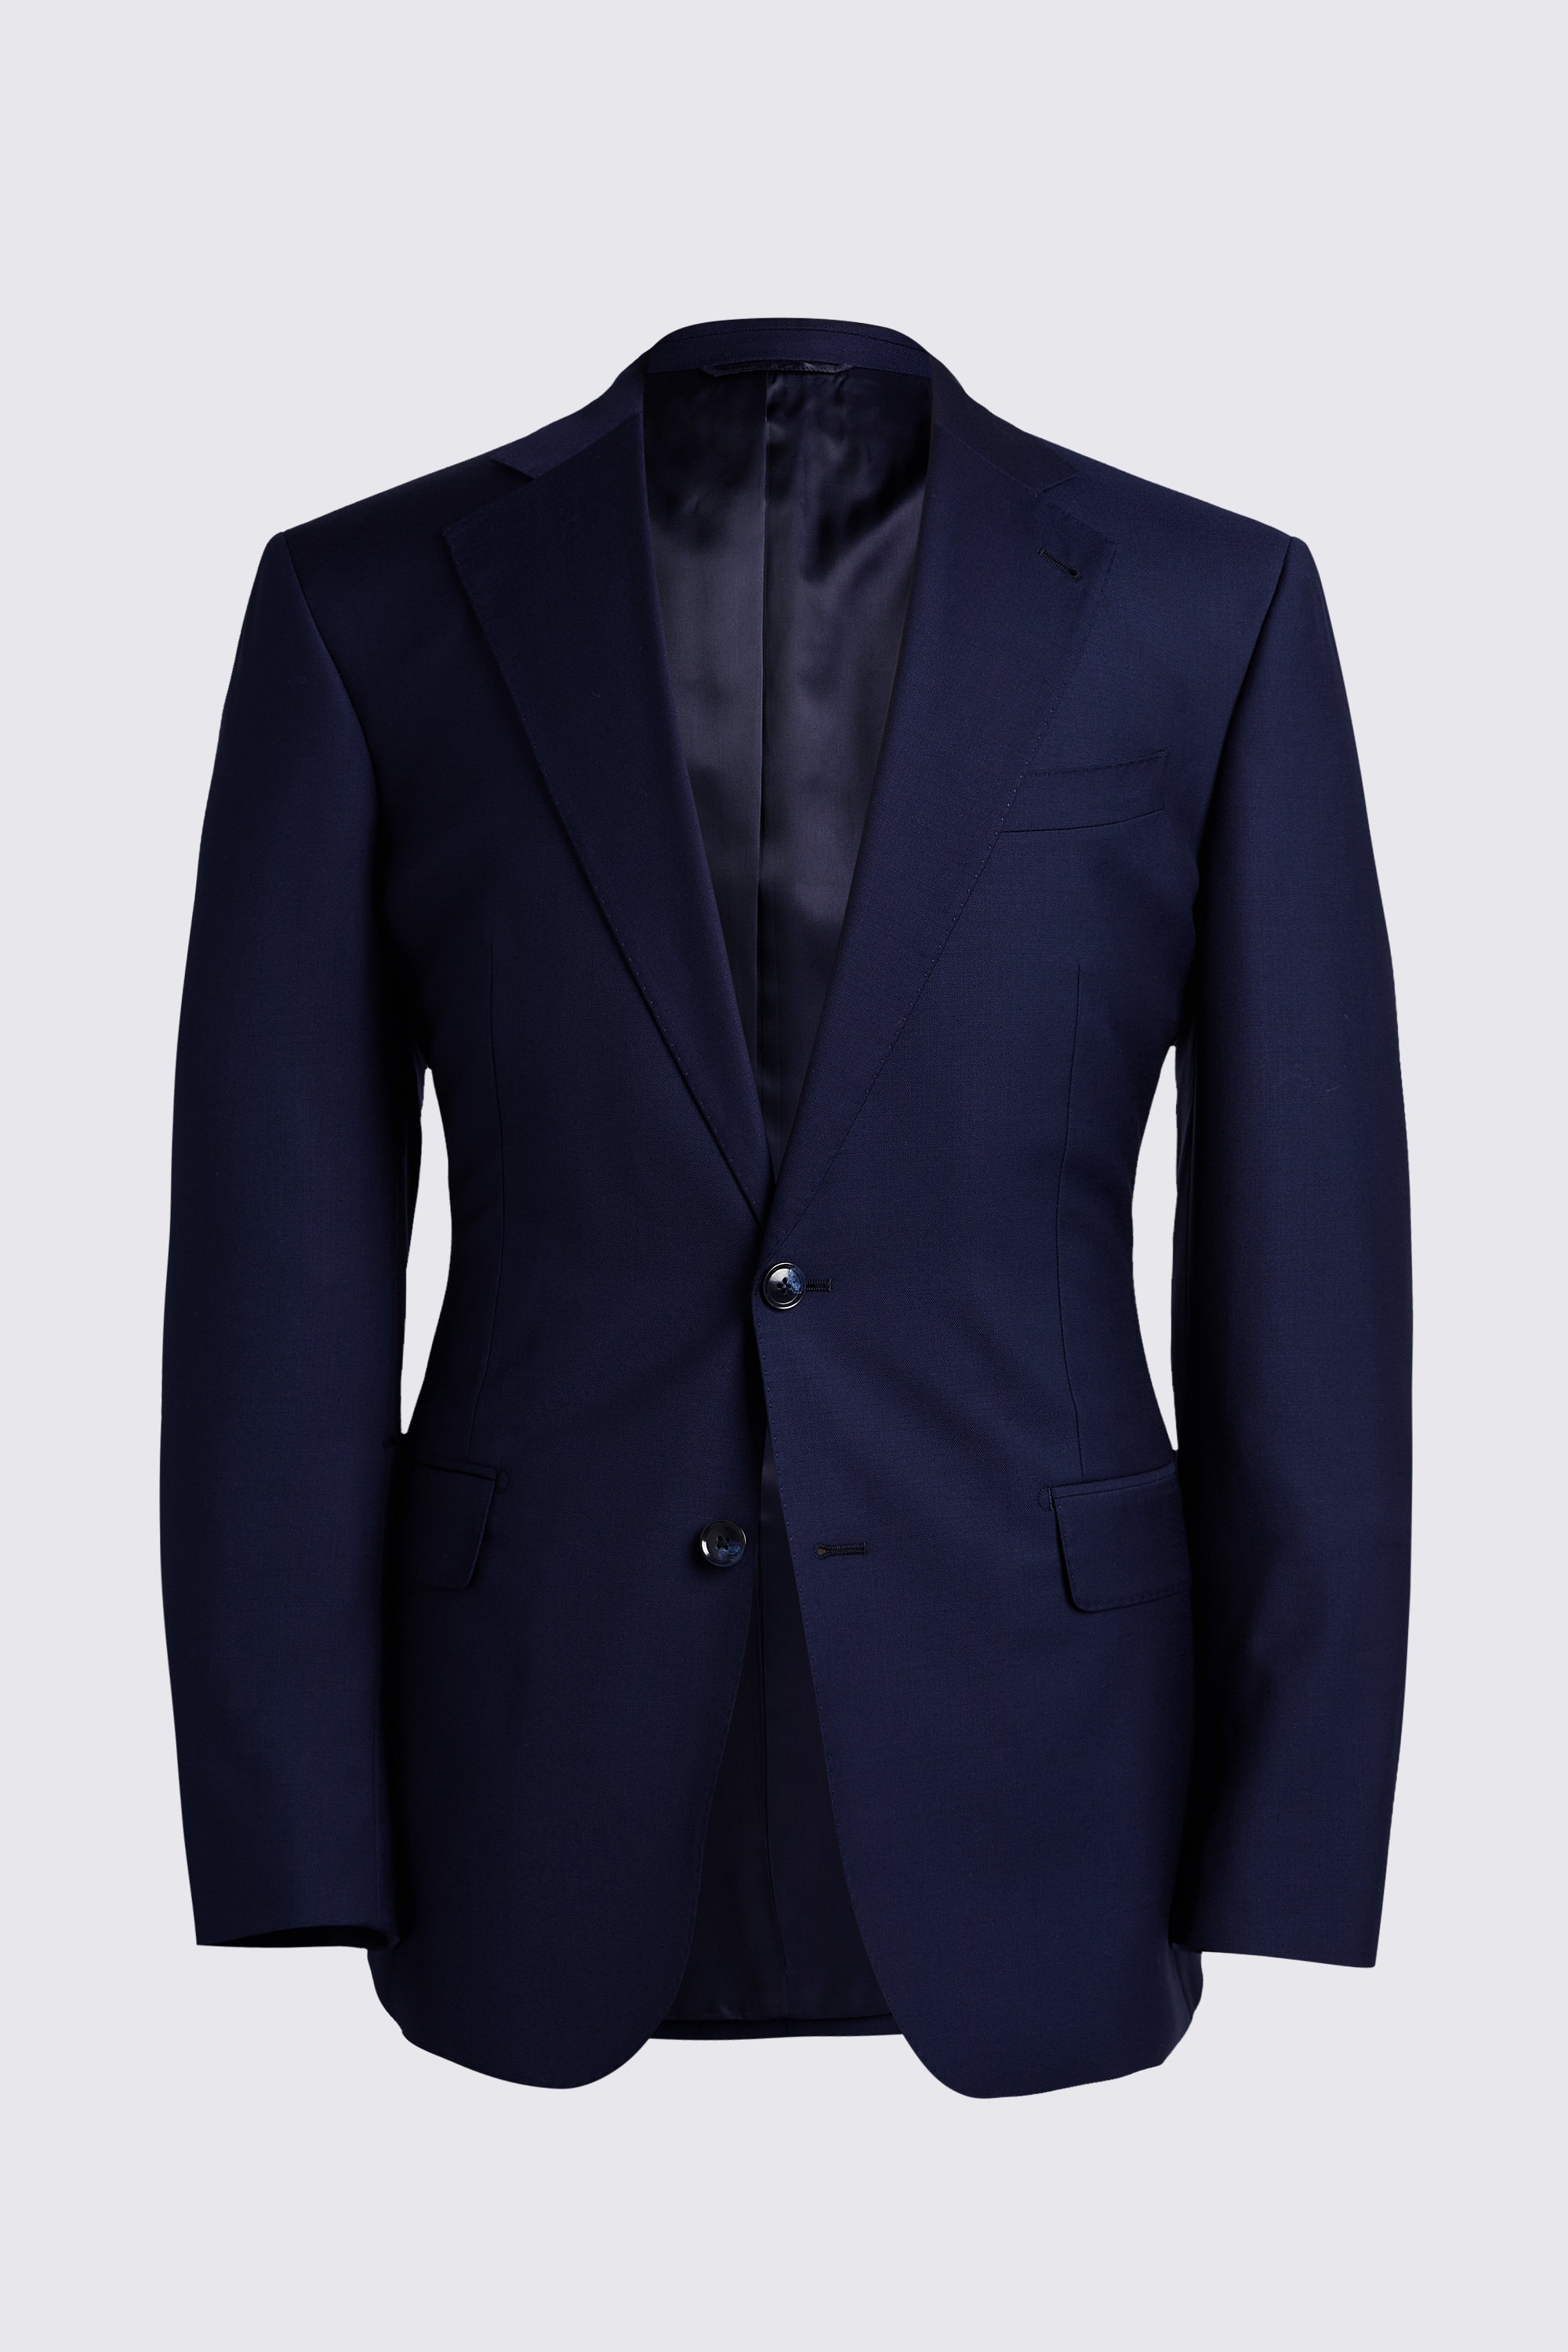 Italian Tailored Fit Navy Jacket | Buy Online at Moss